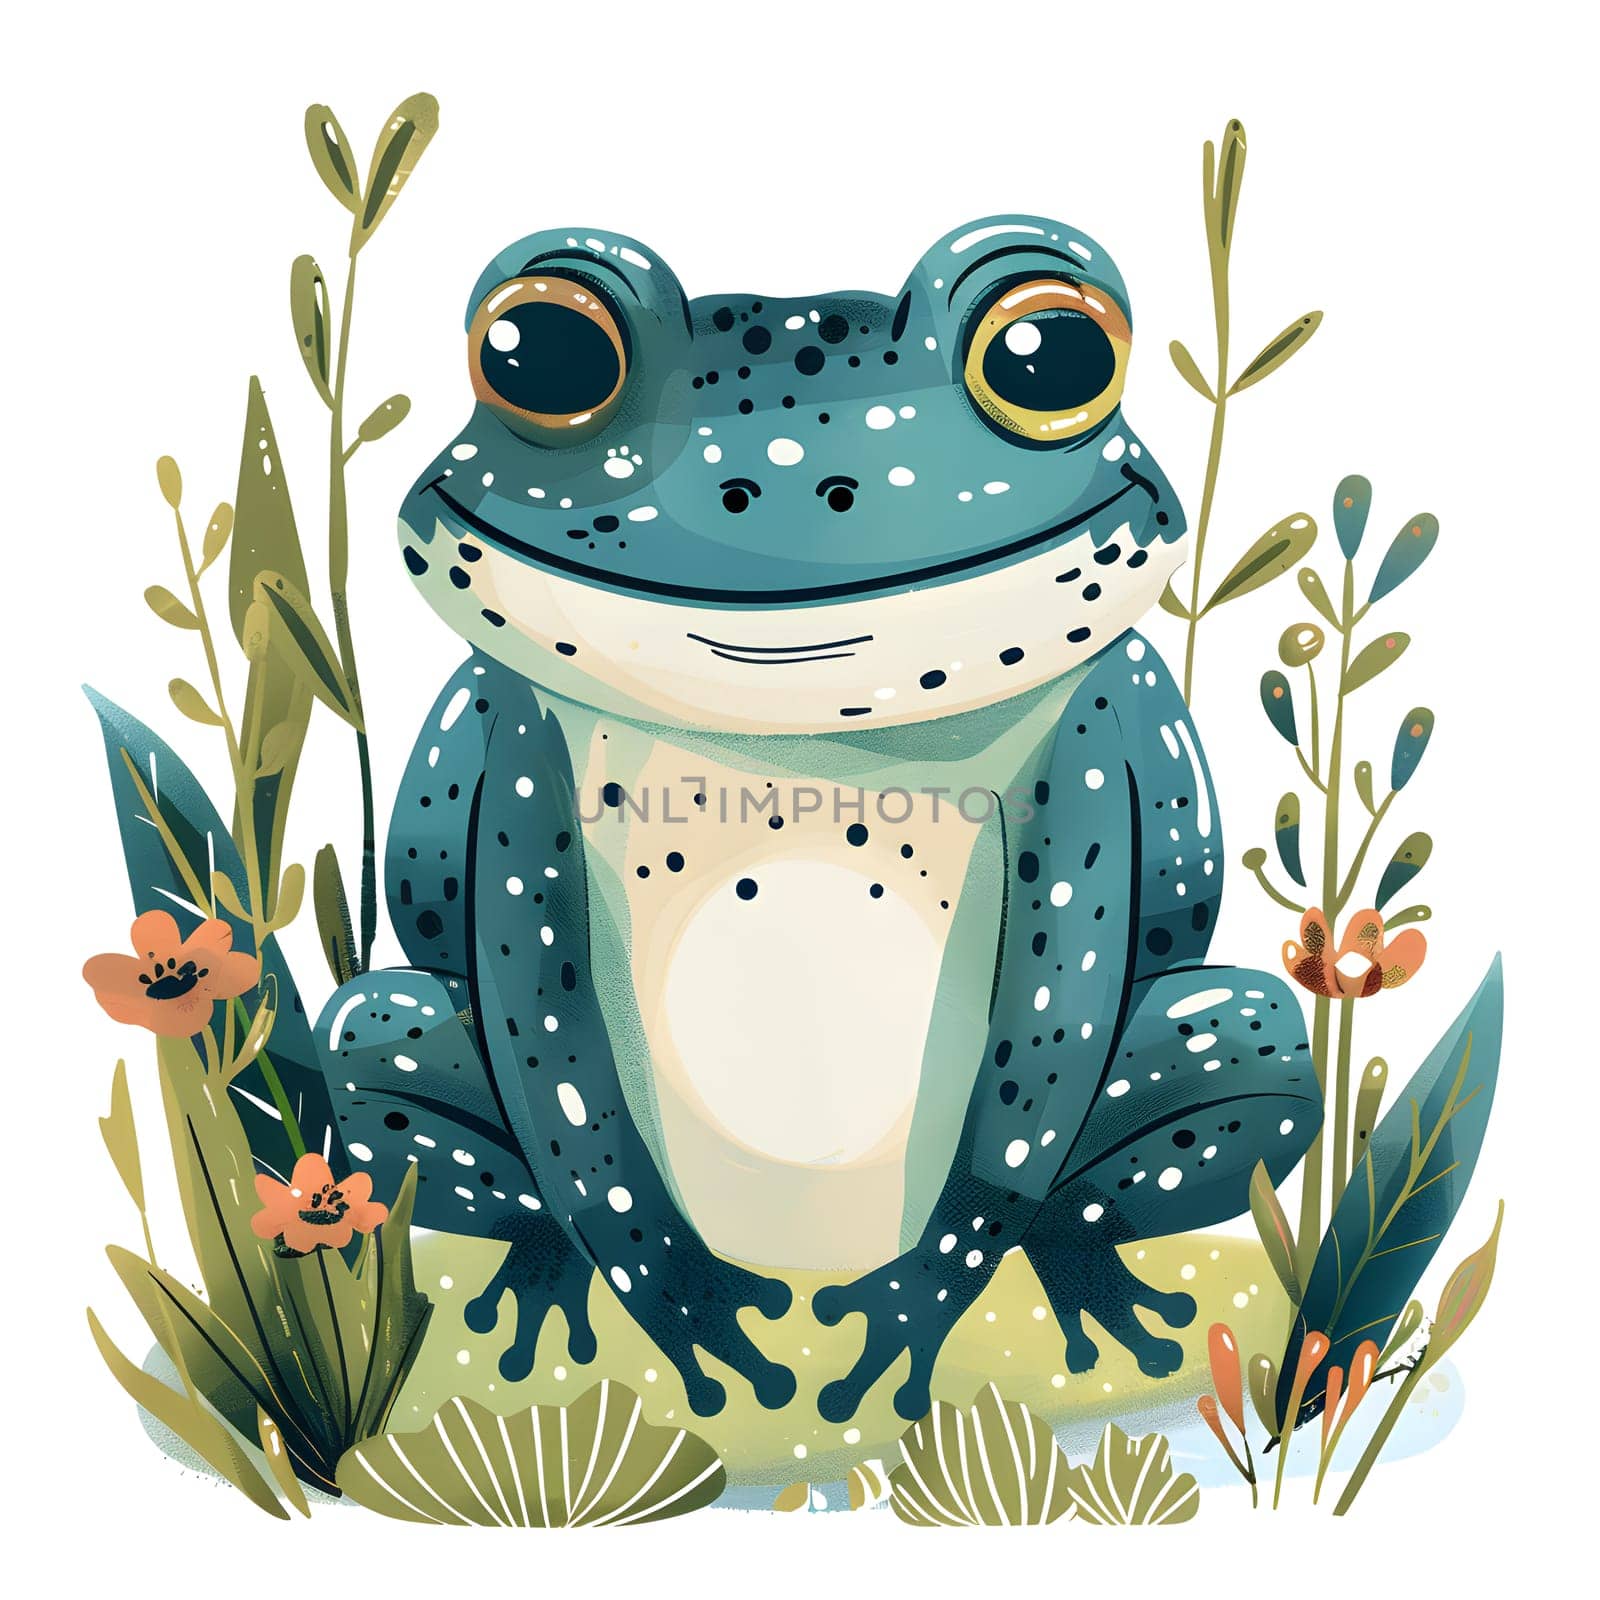 True frog sitting amidst plants and flowers in grass by Nadtochiy